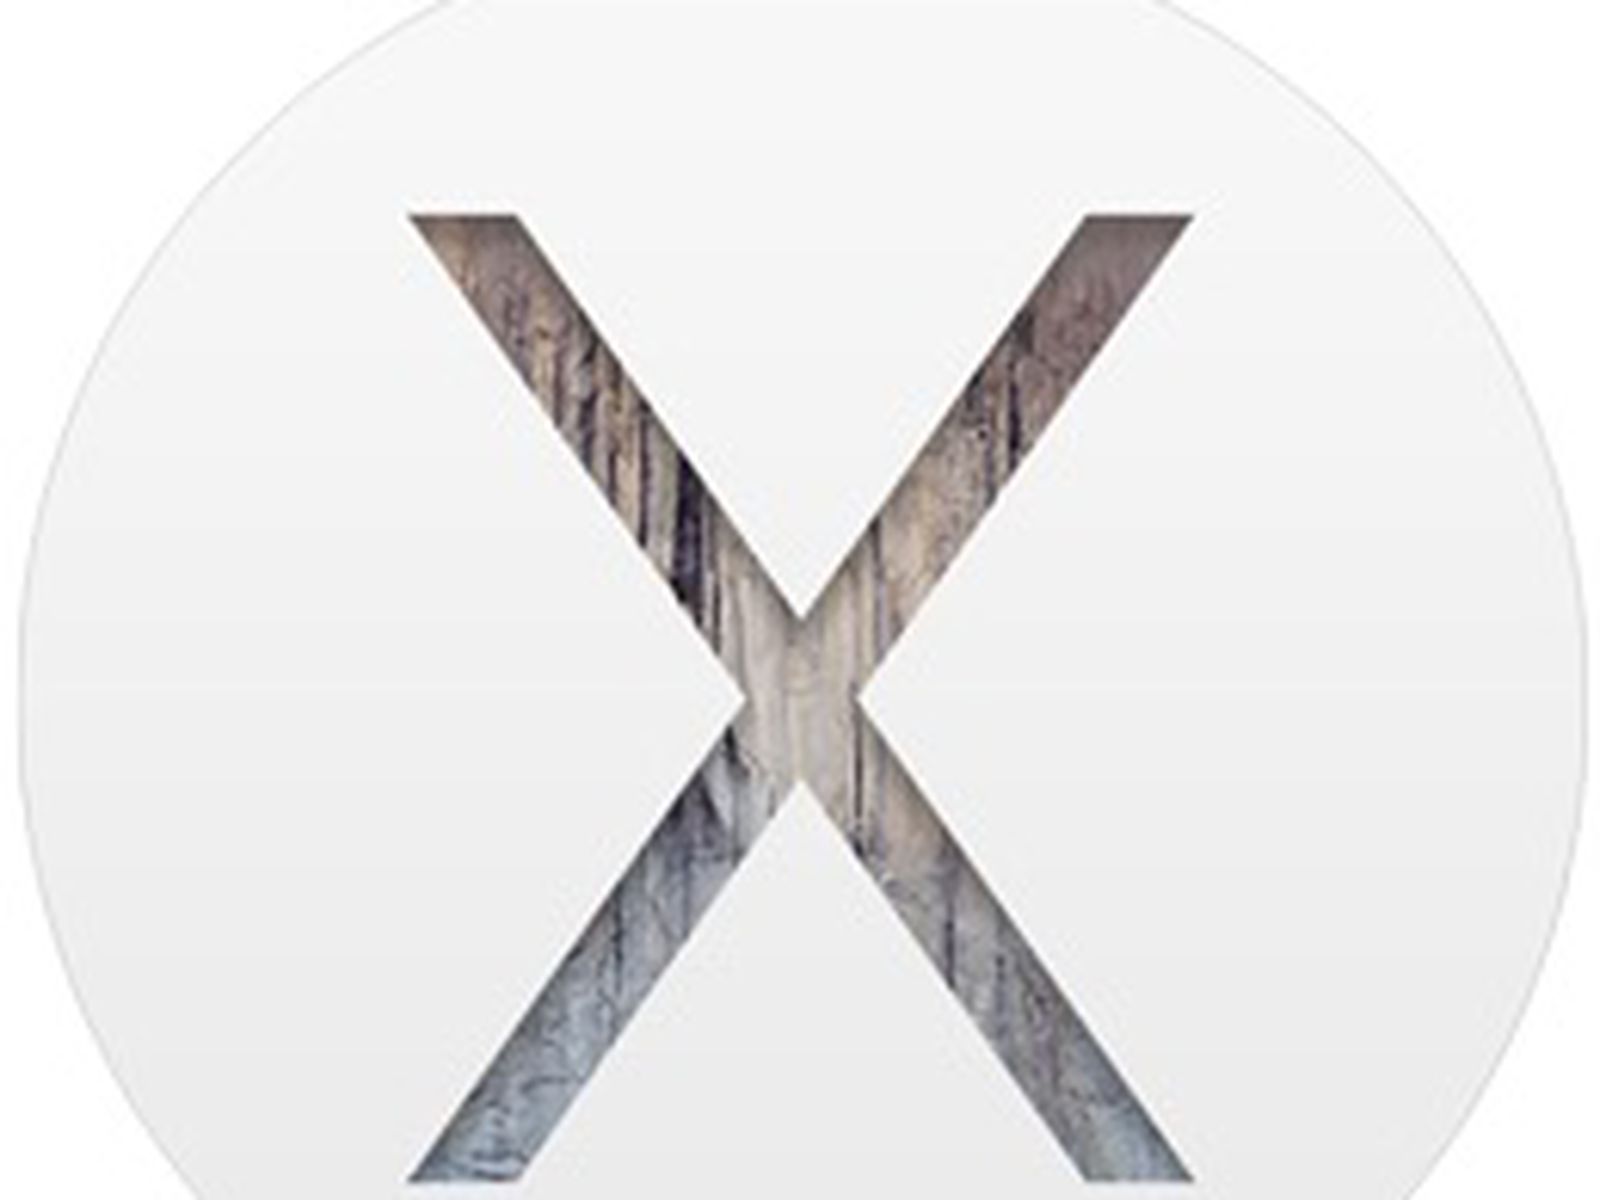 wine for mac os x 10.10